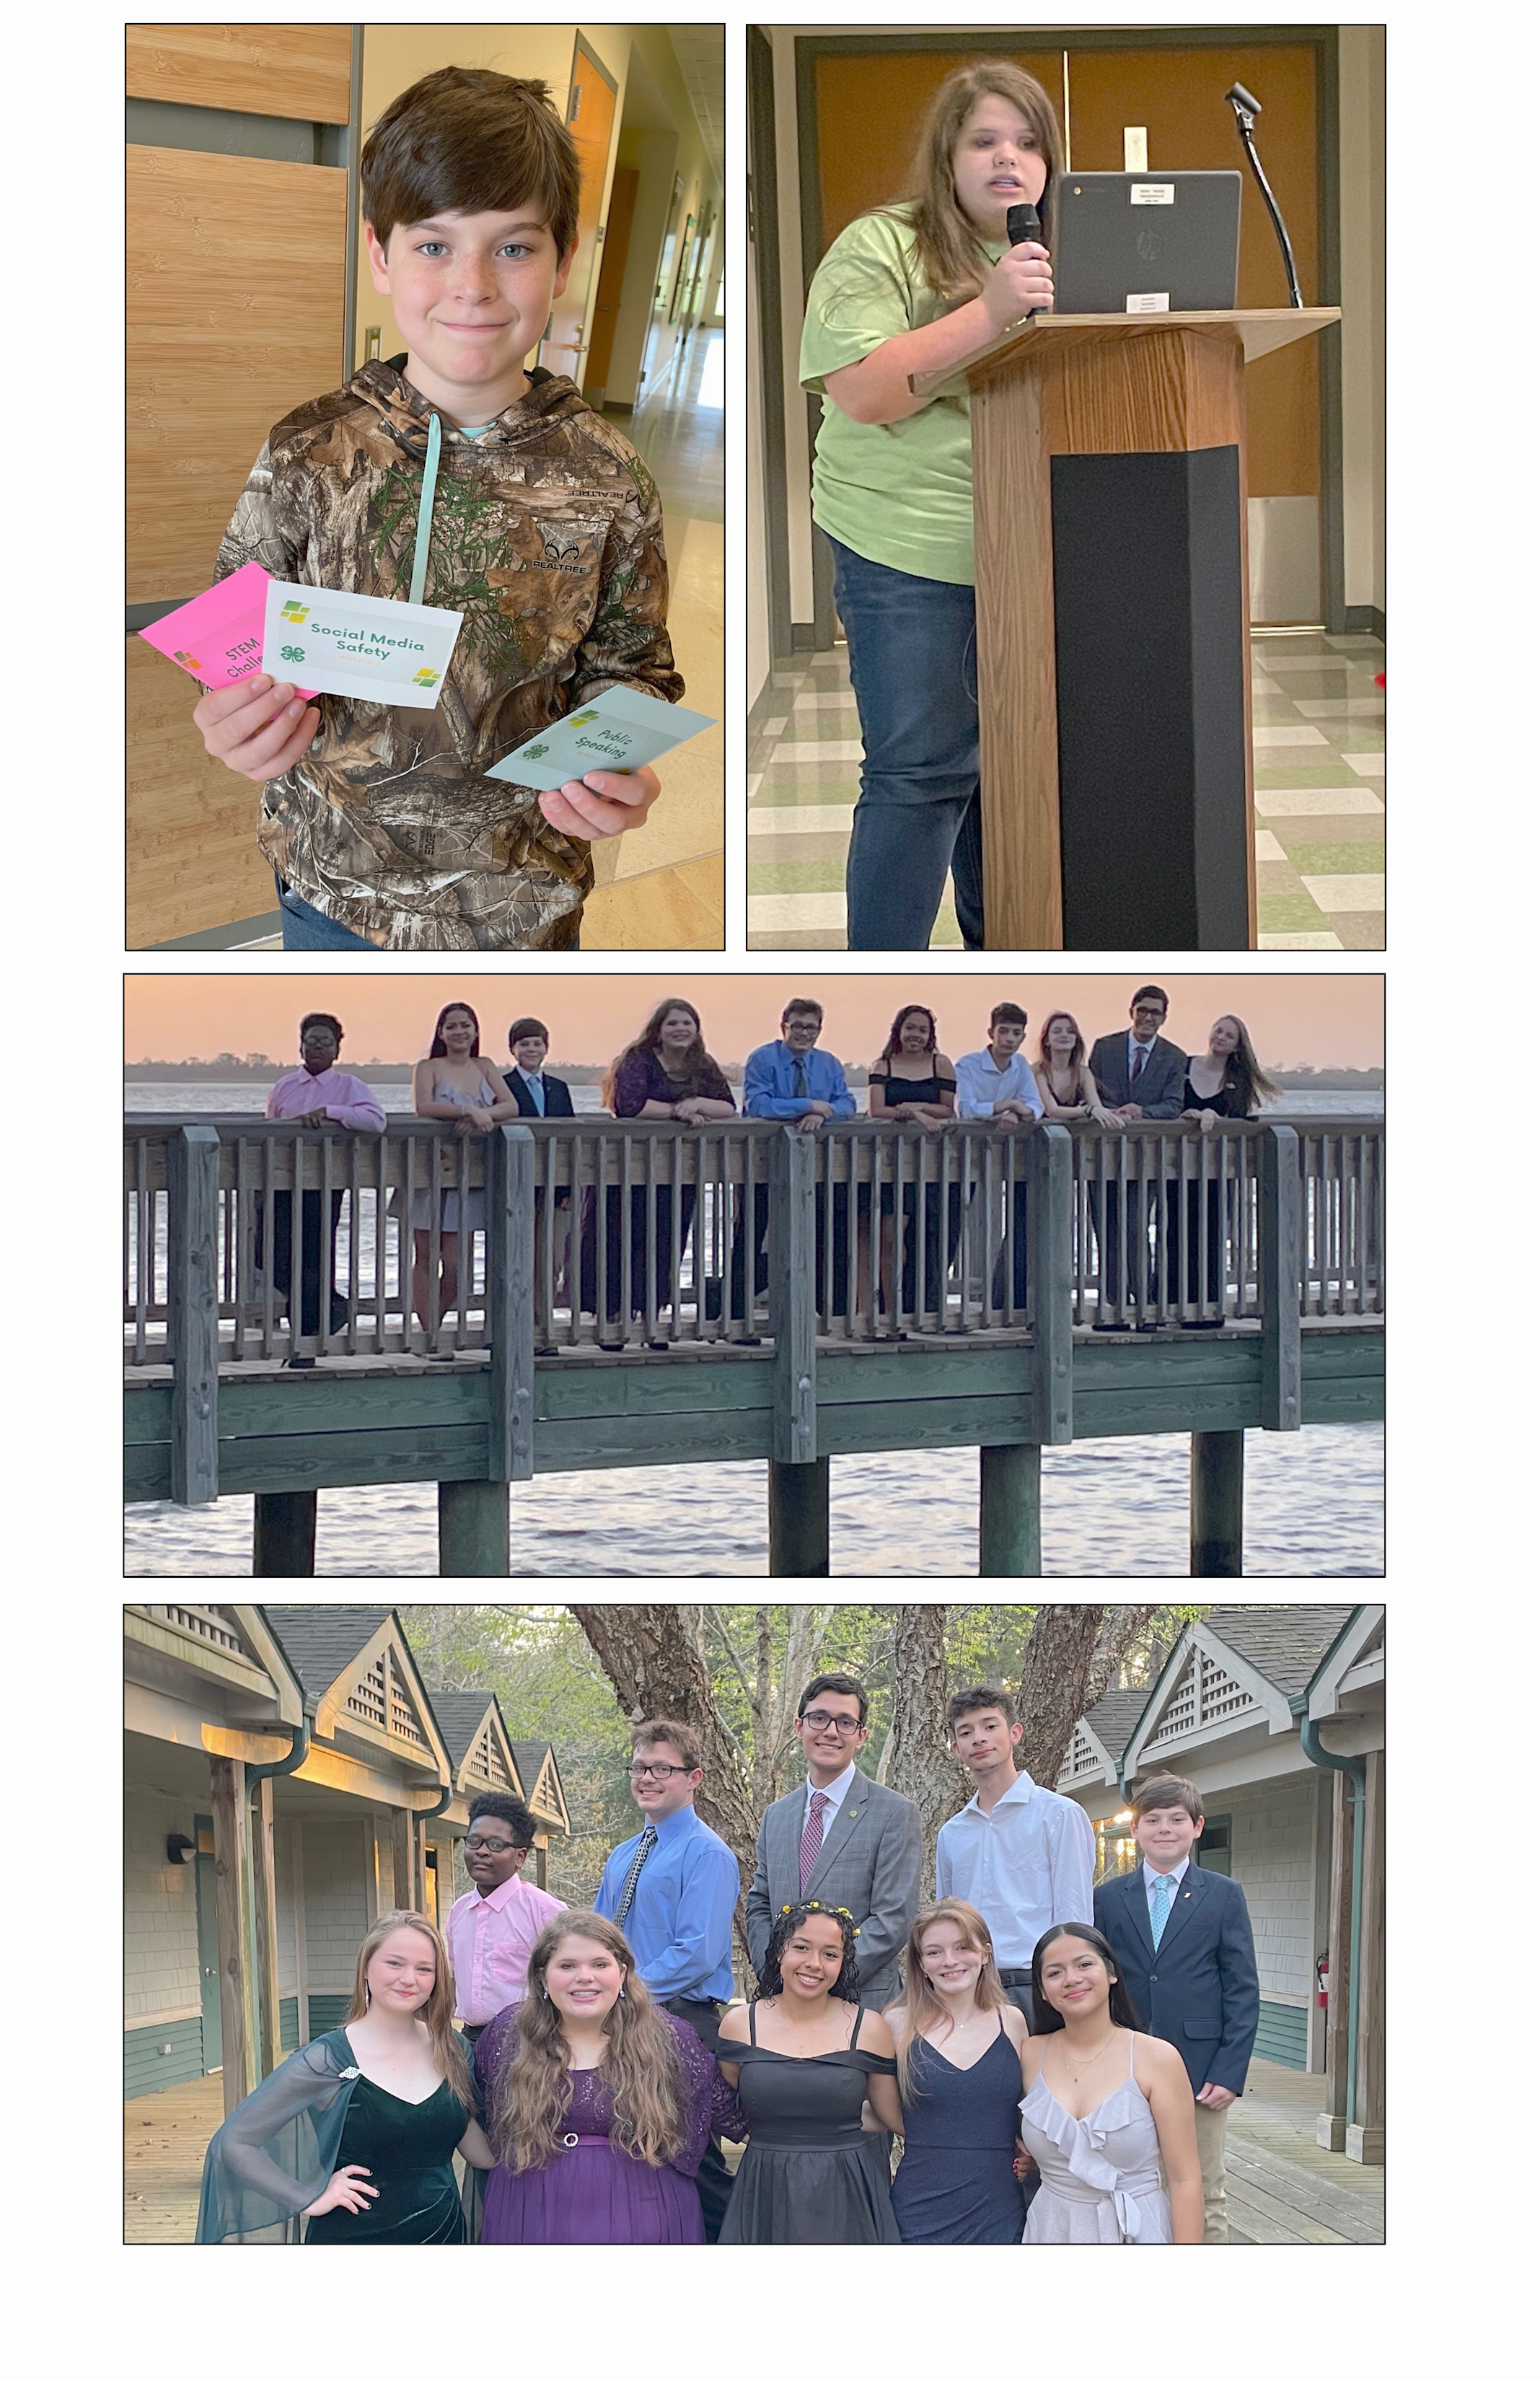 Teen Retreat participants from left: top, Ayden Wyatt with his workshop choices; right, Meredith Potter as Northeast District President running the business meeting; On the dock, from left to right: Spencer Perry, Sophia Bobbitt, Ayden Wyatt, Meredith Potter, Bryson Freed, Mia Clark, Harold Diaz-Rodriguez, Tia Iversen, Lance Williams, and Emma Haynes; Back Row L to R: Spencer Perry, Bryson Freed, Lance Williams, Harold Diaz-Rodriguez, and Ayden Wyatt Front Row L to R: Emma Haynes, Meredith Potter, Mia Clark, Tia Iversen, and Sophia Bobbitt; dressed for the banquet:Back Row L to R: Spencer Perry, Bryson Freed, Lance Williams, Harold Diaz-Rodriguez, and Ayden Wyatt Front Row L to R: Emma Haynes, Meredith Potter, Mia Clark, Tia Iversen, and Sophia Bobbitt.